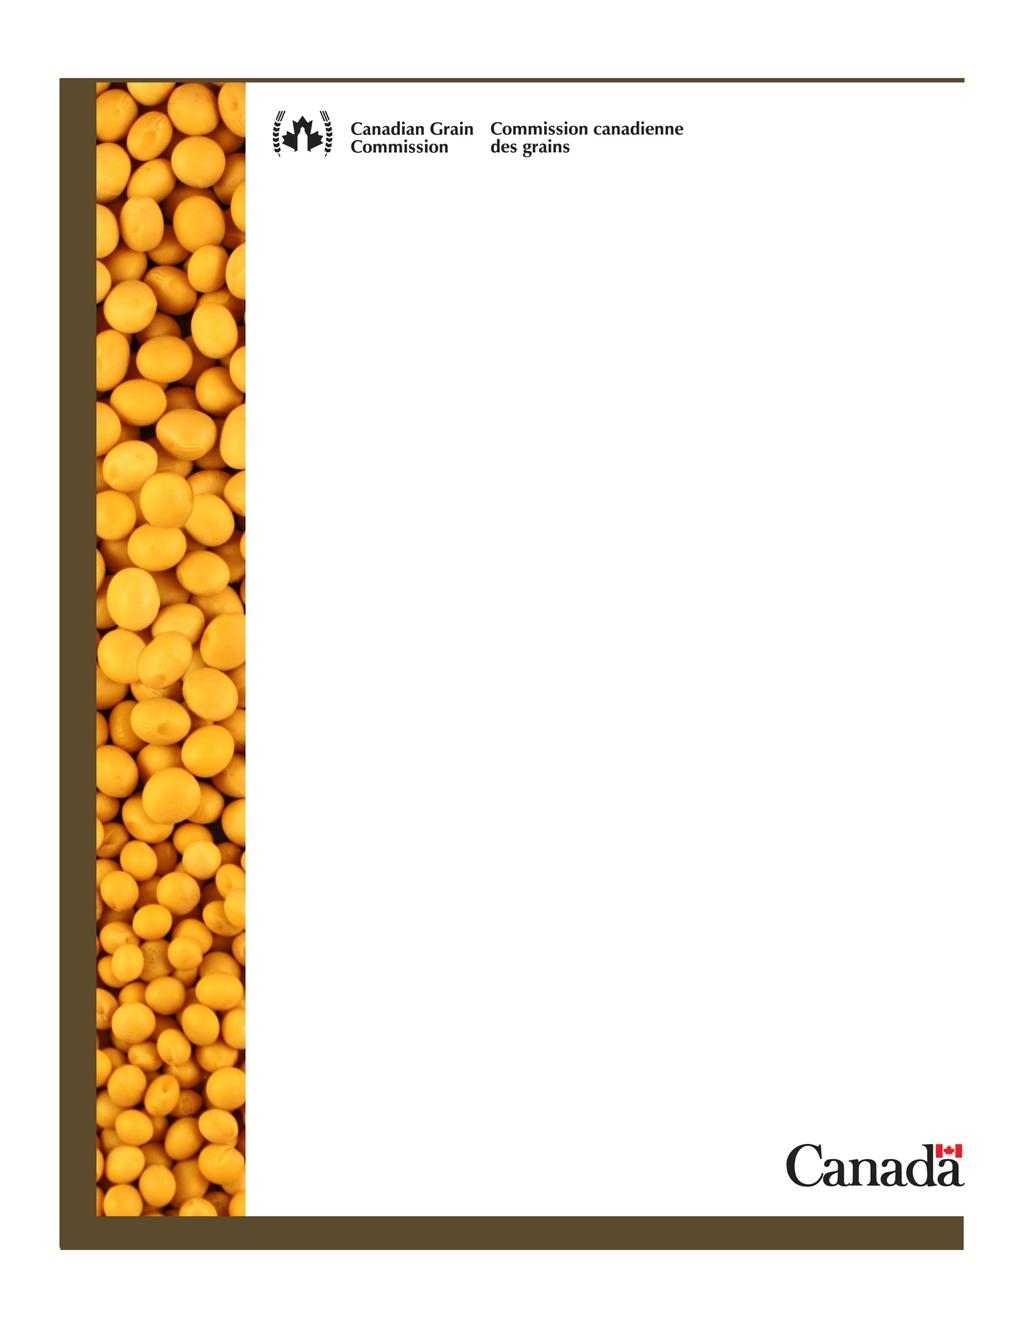 ISSN 1927-8225 Quality of Canadian food-type soybeans 2014 Ning Wang Program Manager, Pulse Research Contact: Ning Wang Program Manager, Pulse Research Telephone: 204